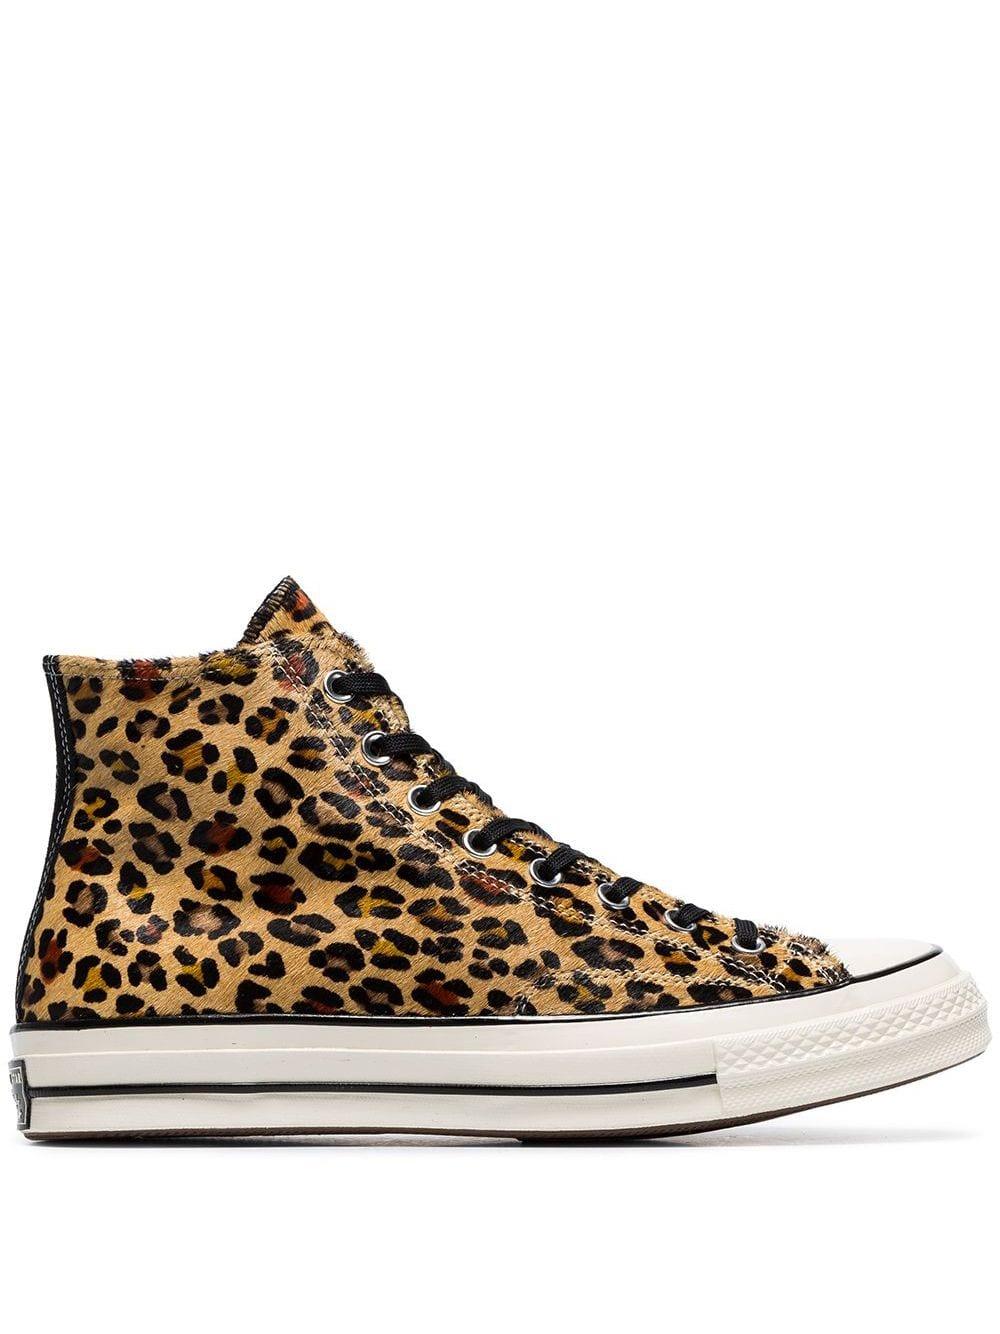 Converse Leopard Print Chuck Taylor 70's High-top Sneakers for Men | Lyst